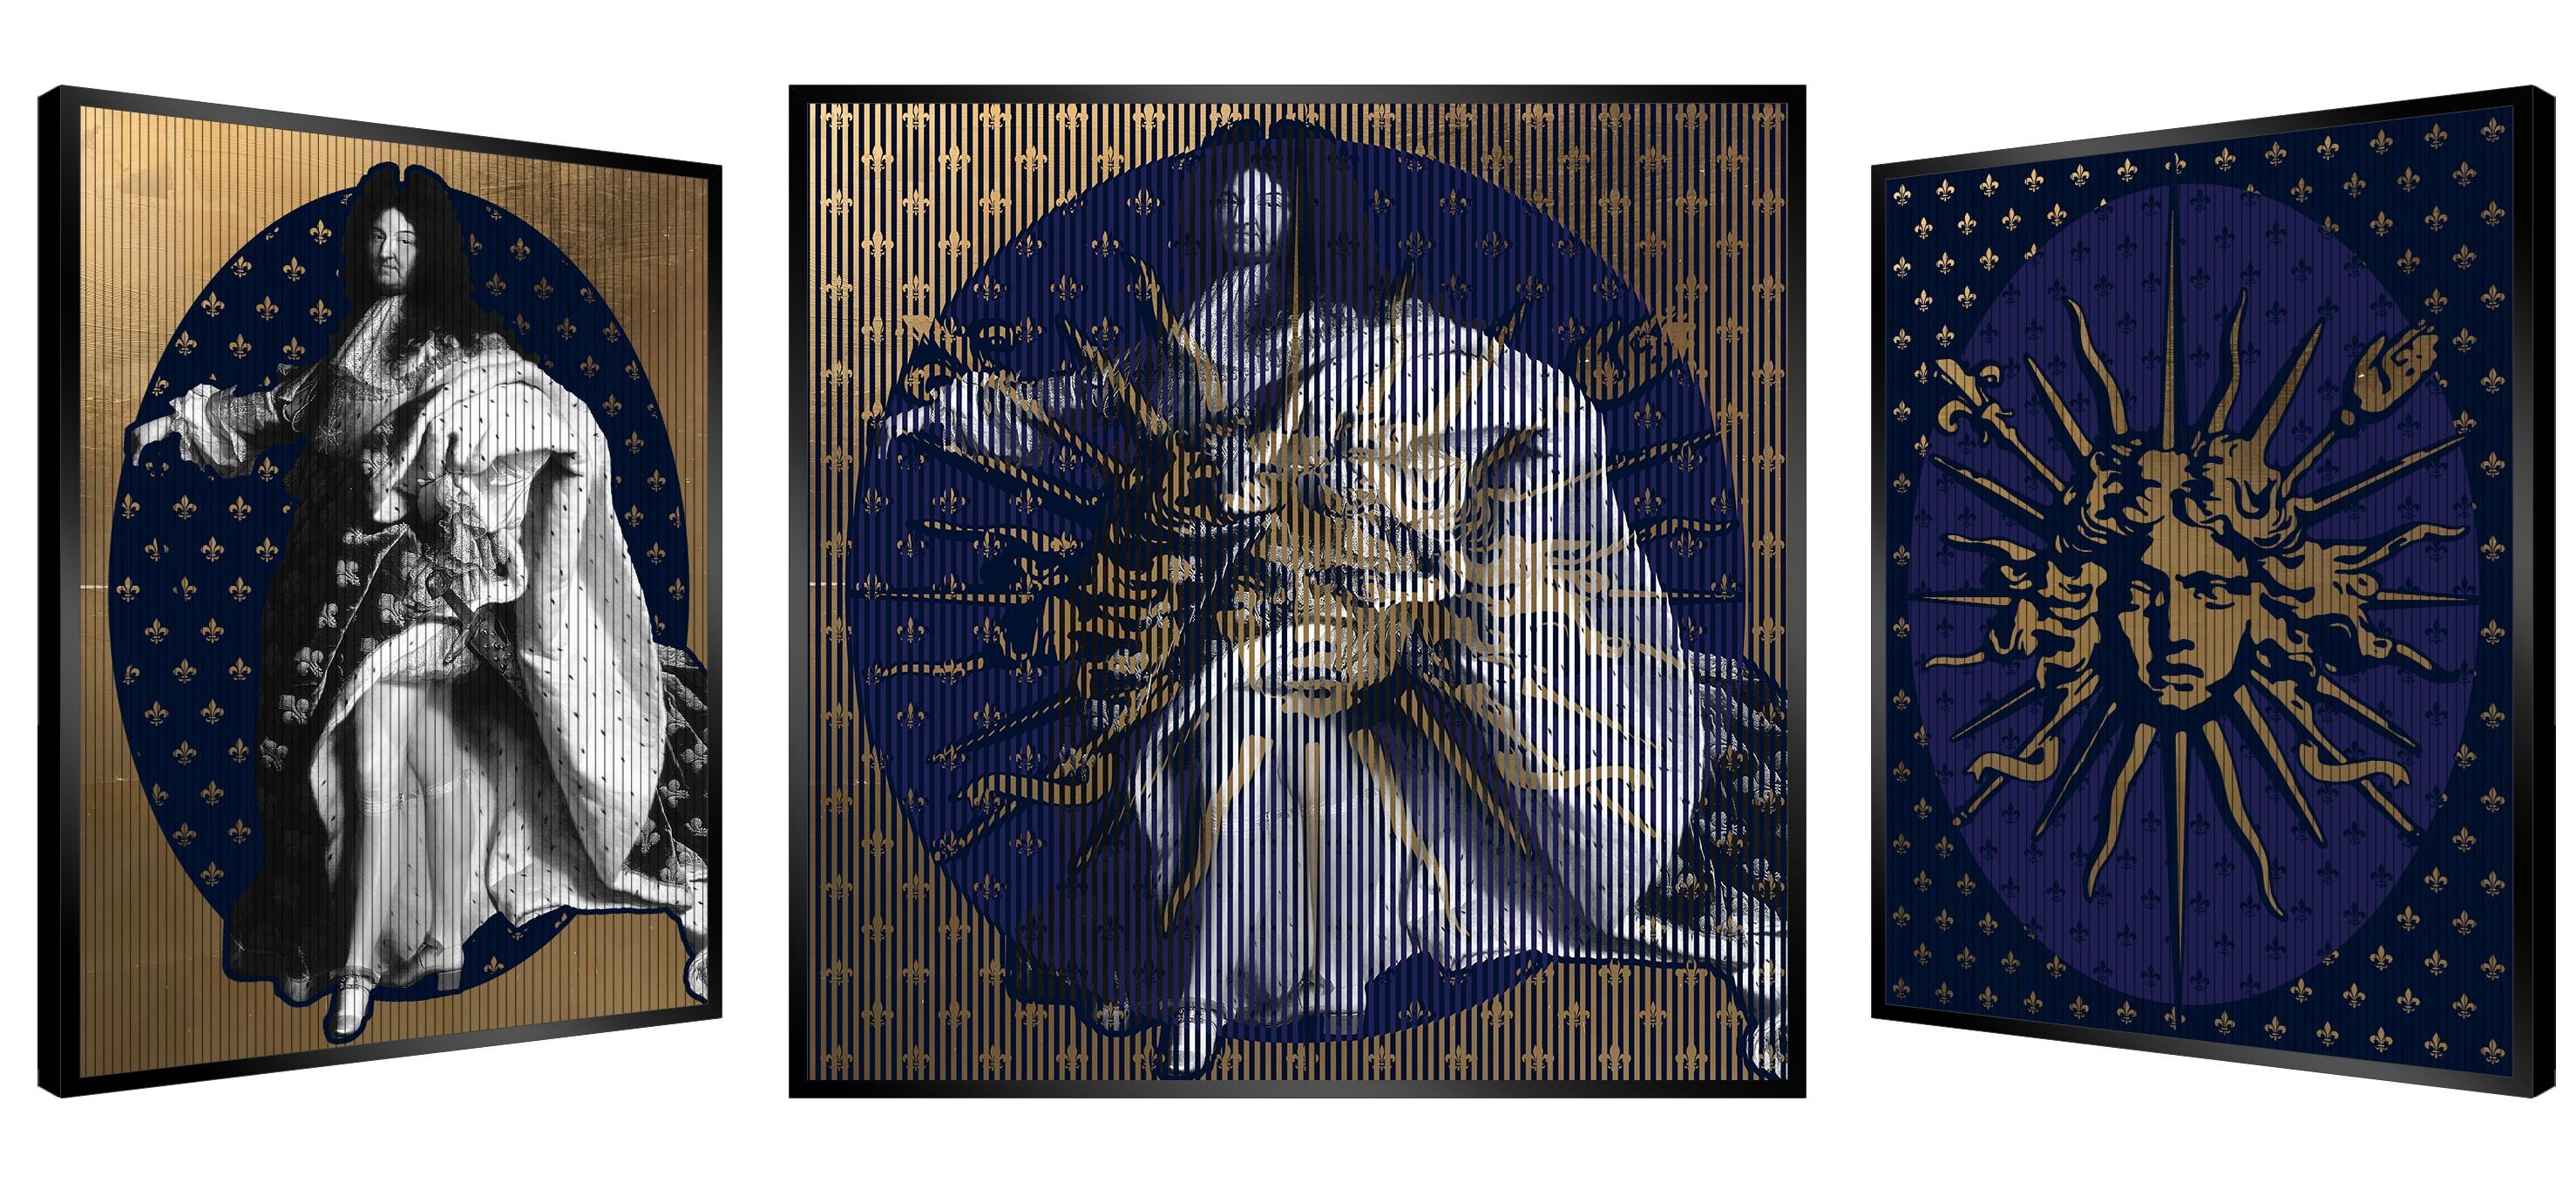 This 4'2'' unique artwork represents Louis XIV, also known as the Sun King. It was created by the French artist Patrick Rubinstein with 22-carat gold leaf.

Feel free to contact us to get the best shipping quote. 

